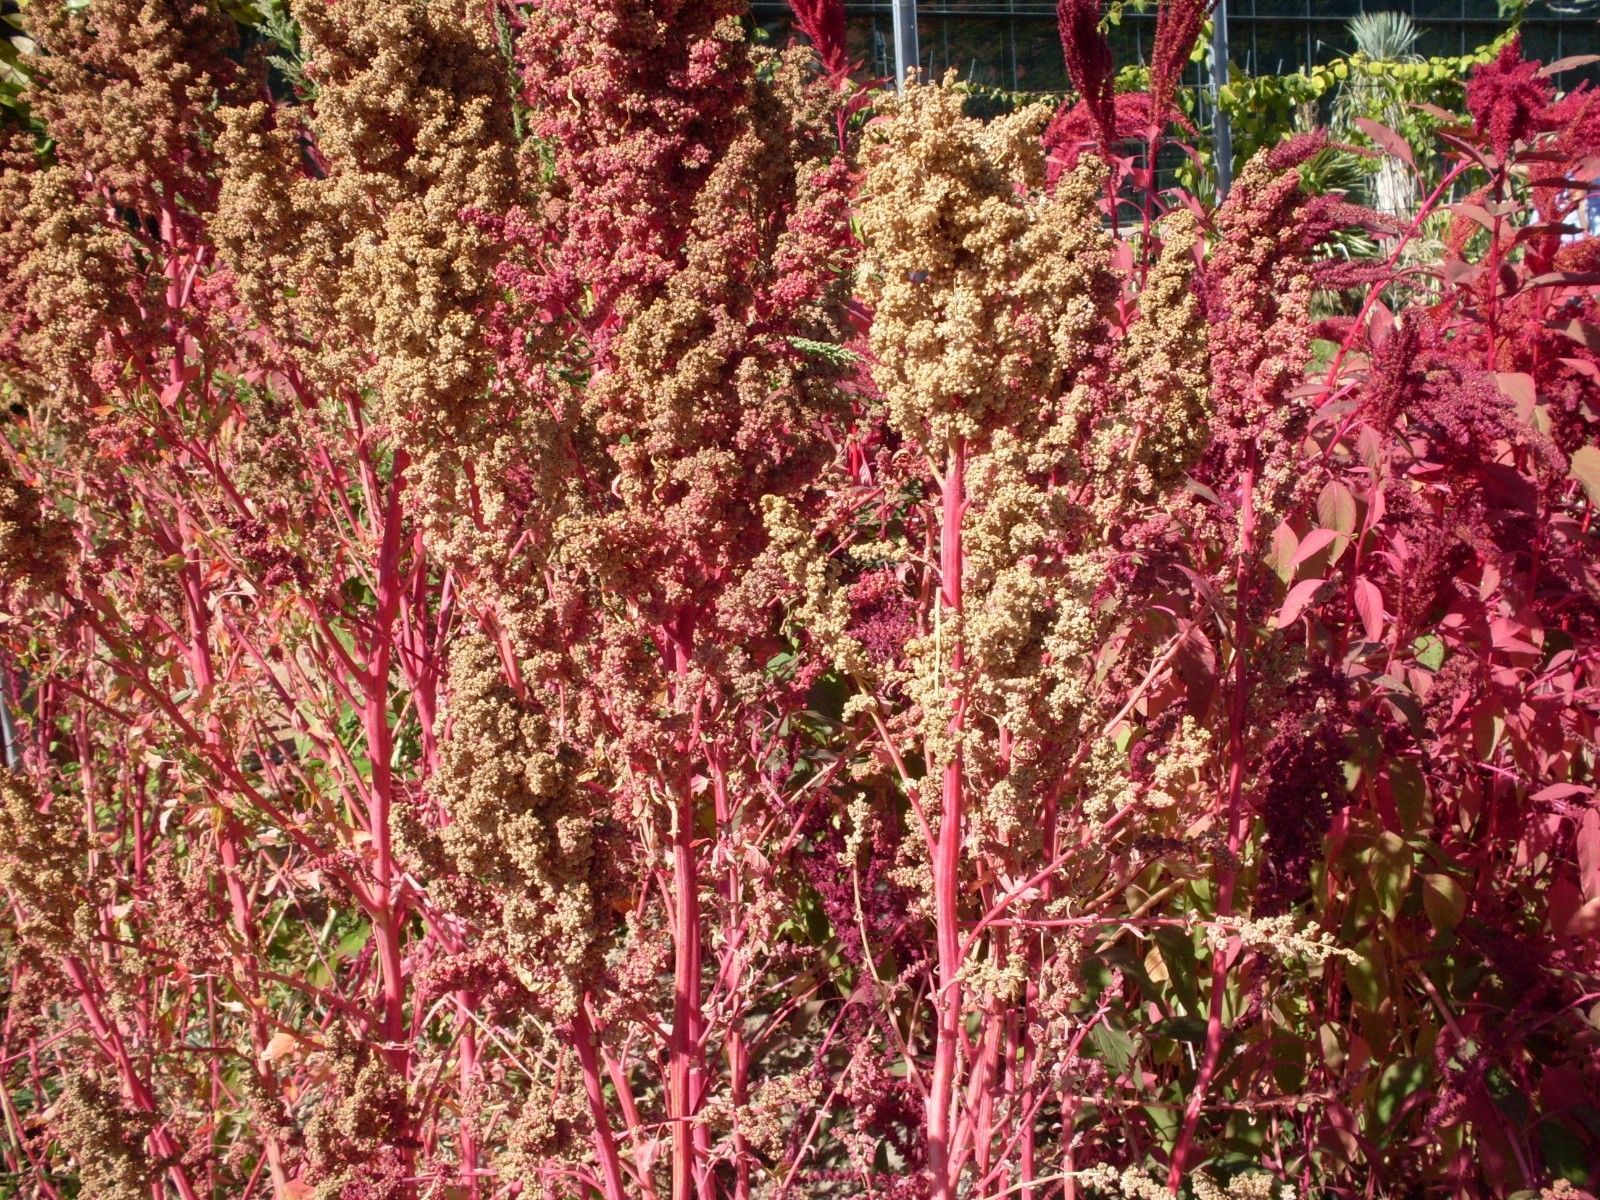 SHIPPED FROM US 100 Organic Cherry Vanilla Quinoa Vegetable Seeds, LC03 - $15.00